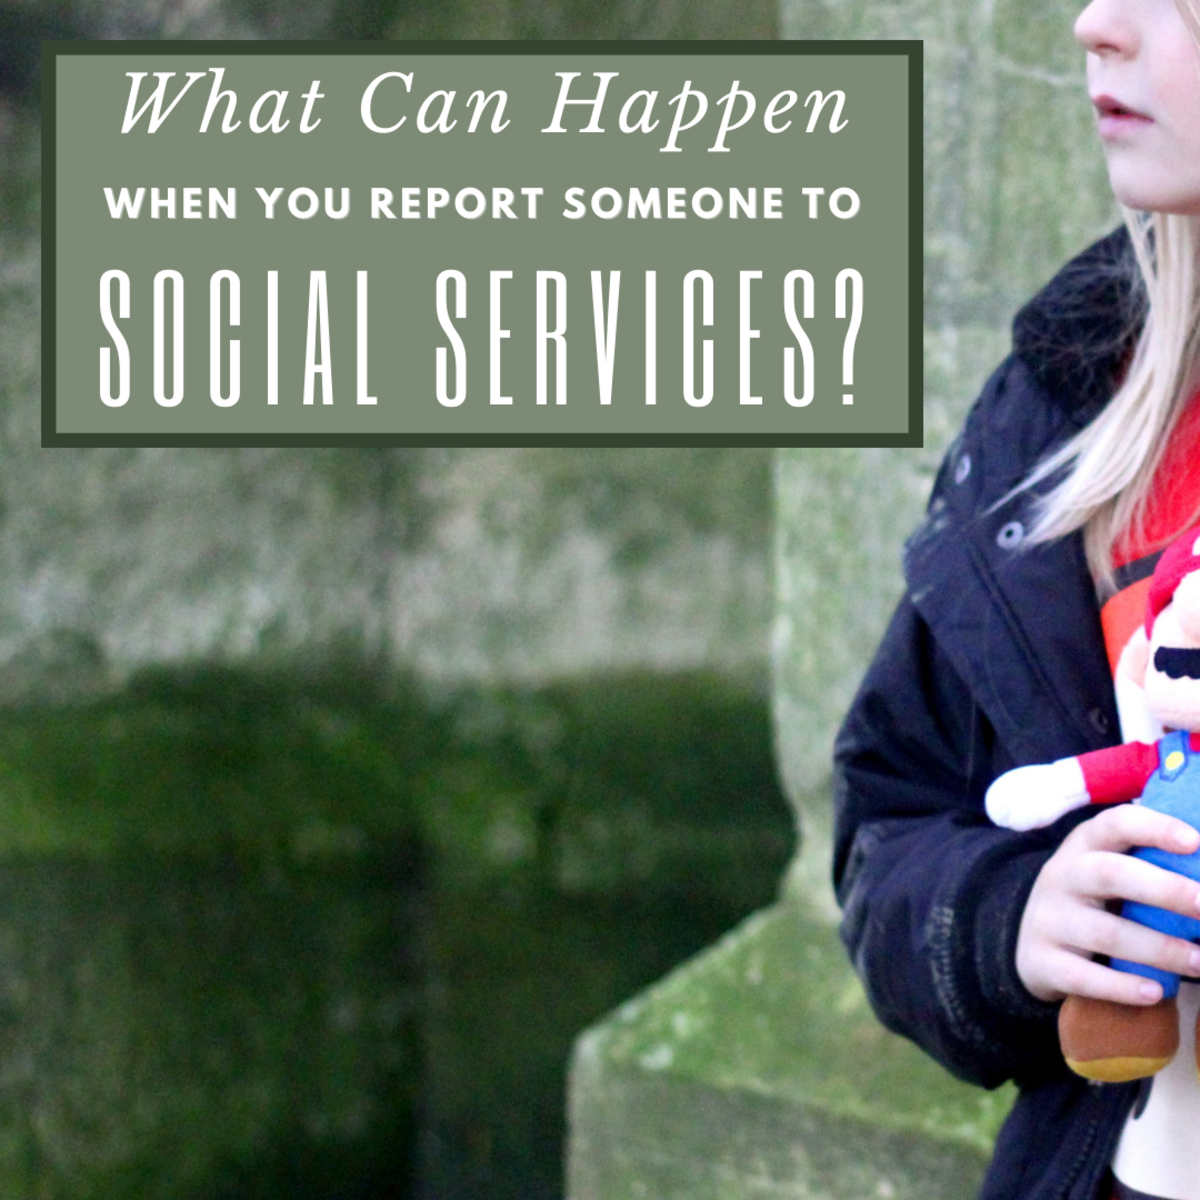 What Happens When You Report Someone to Social Services?